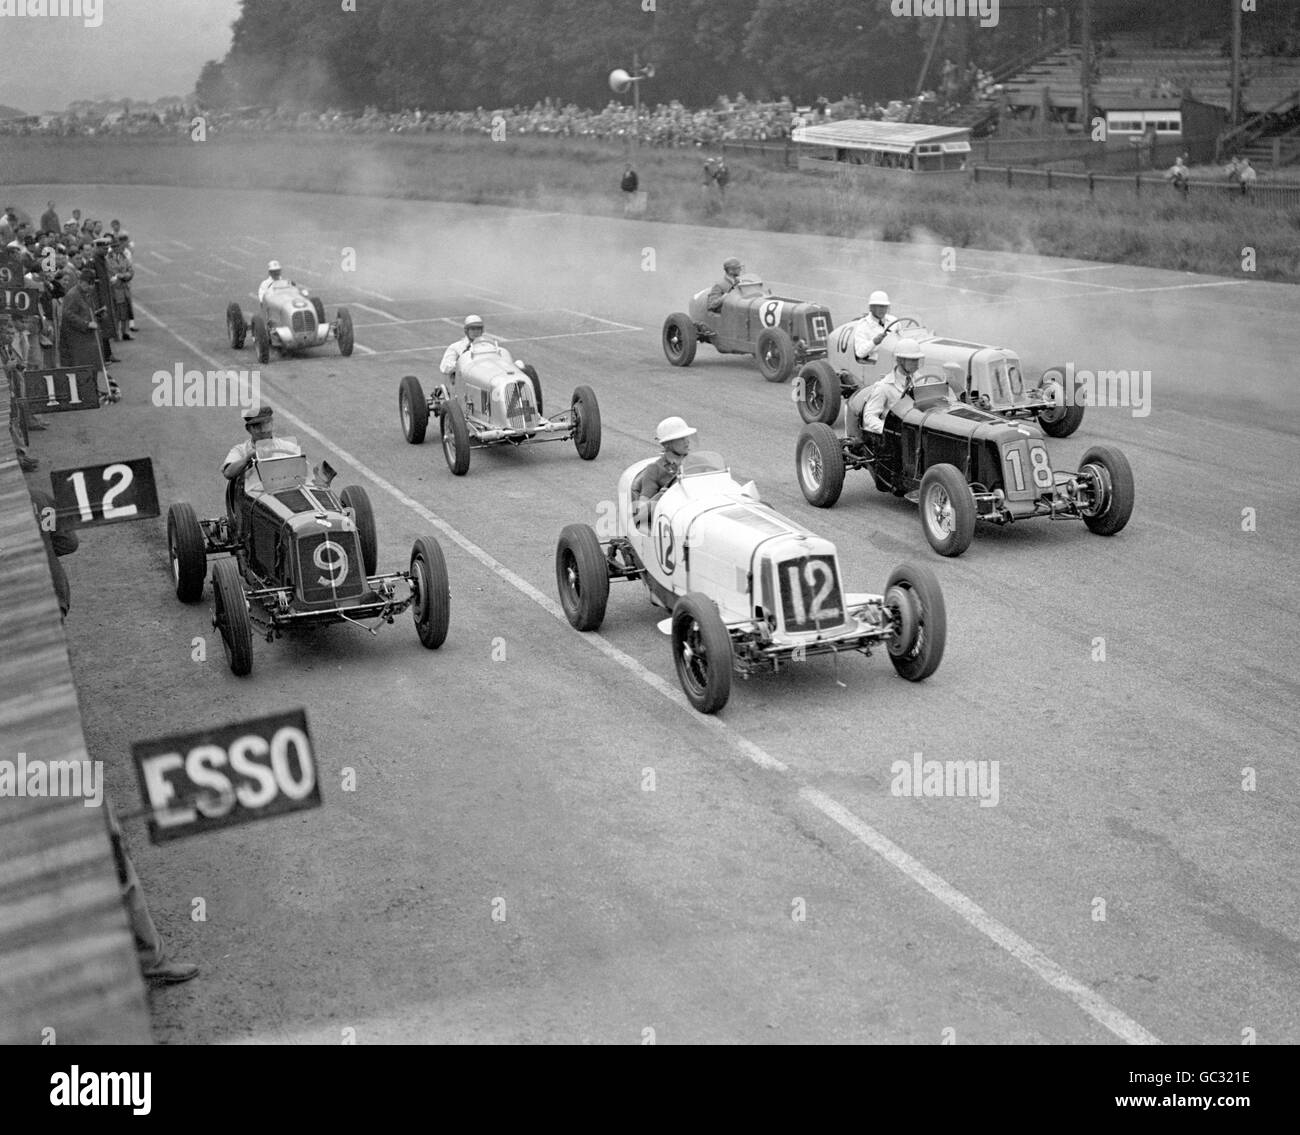 Motor Racing - Nuffield Trophy - Donington Park. The Nuffield Trophy race kicks off at Donington Park as the competitors jostle for position Stock Photo